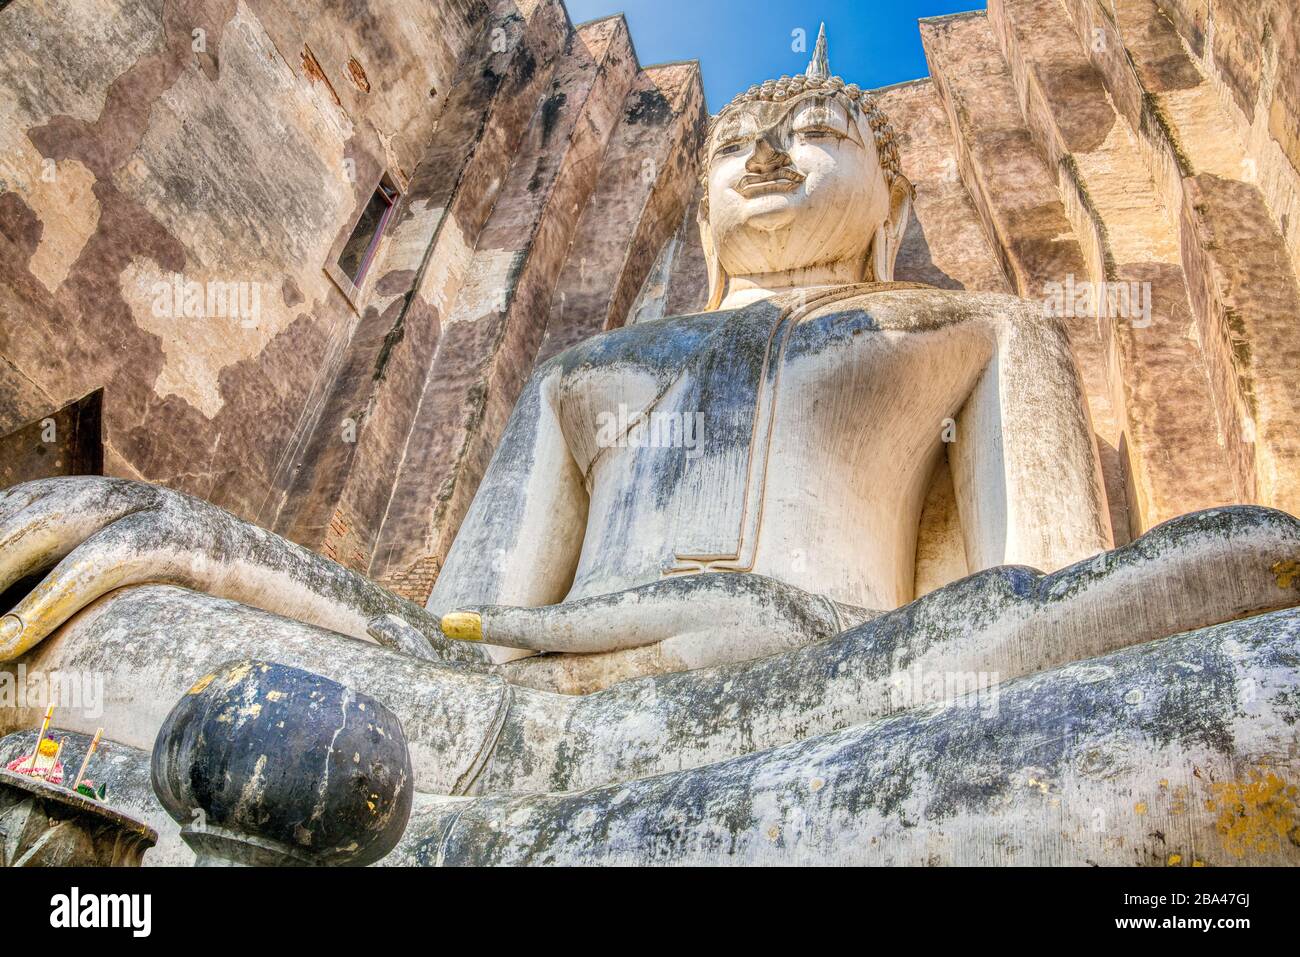 Looking upwards at the Large Buddha at Wat Si Chum Temple in Sukhothai Province Central Thailand. A UNESCO World Heritage Site. Stock Photo